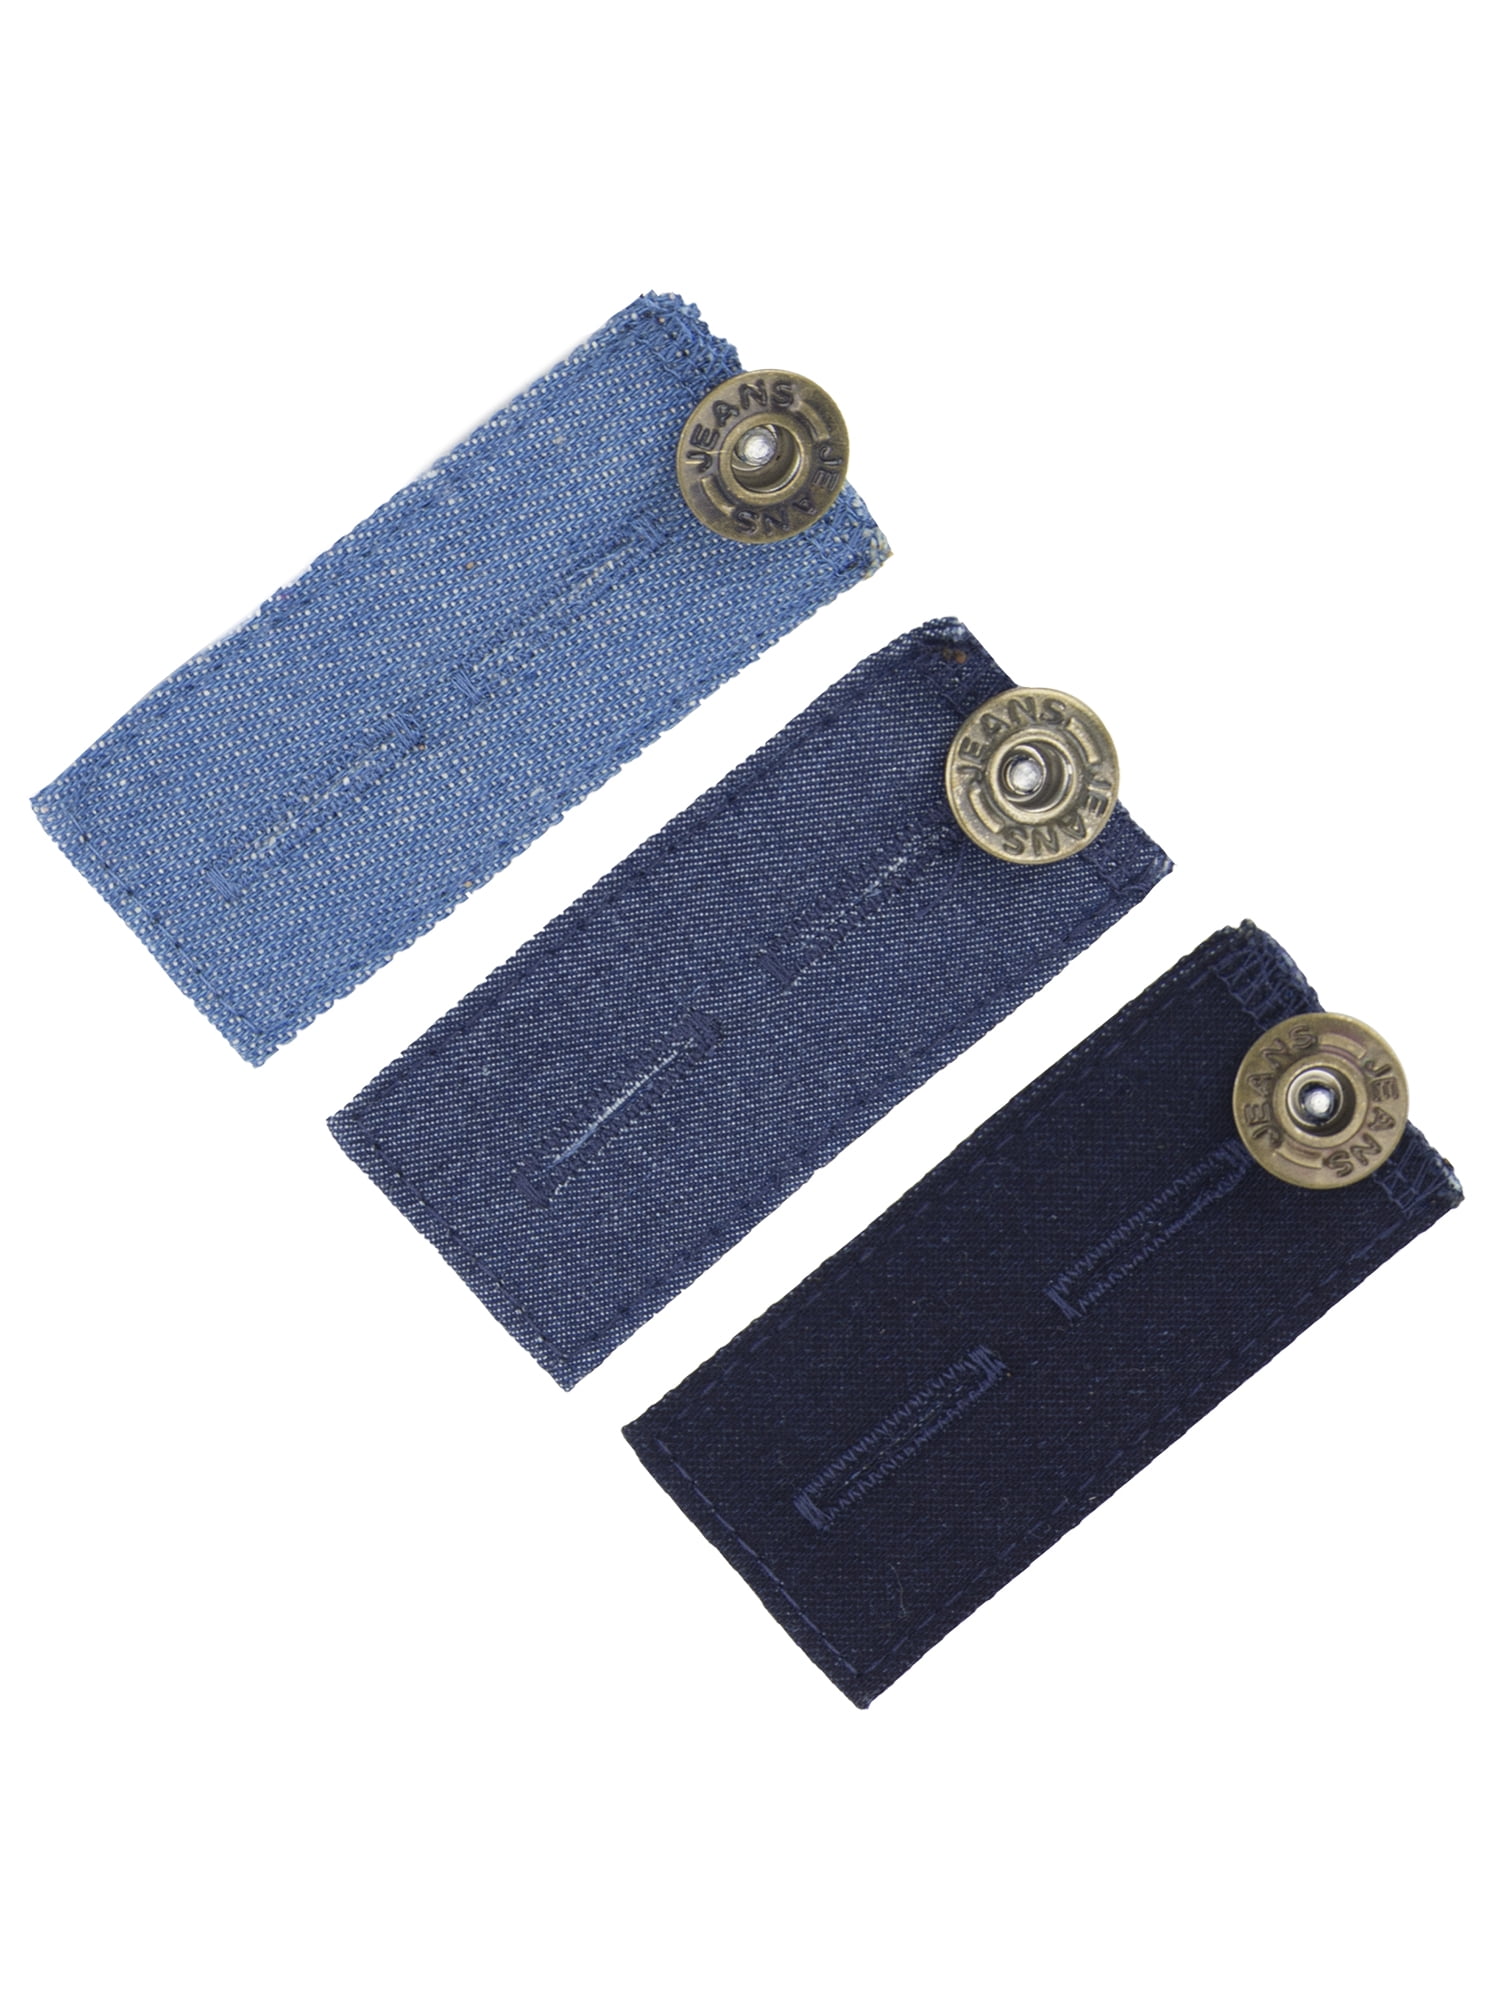 More of Me to Love Denim Jeans Pants Waistband Extender 3-Pack Set 